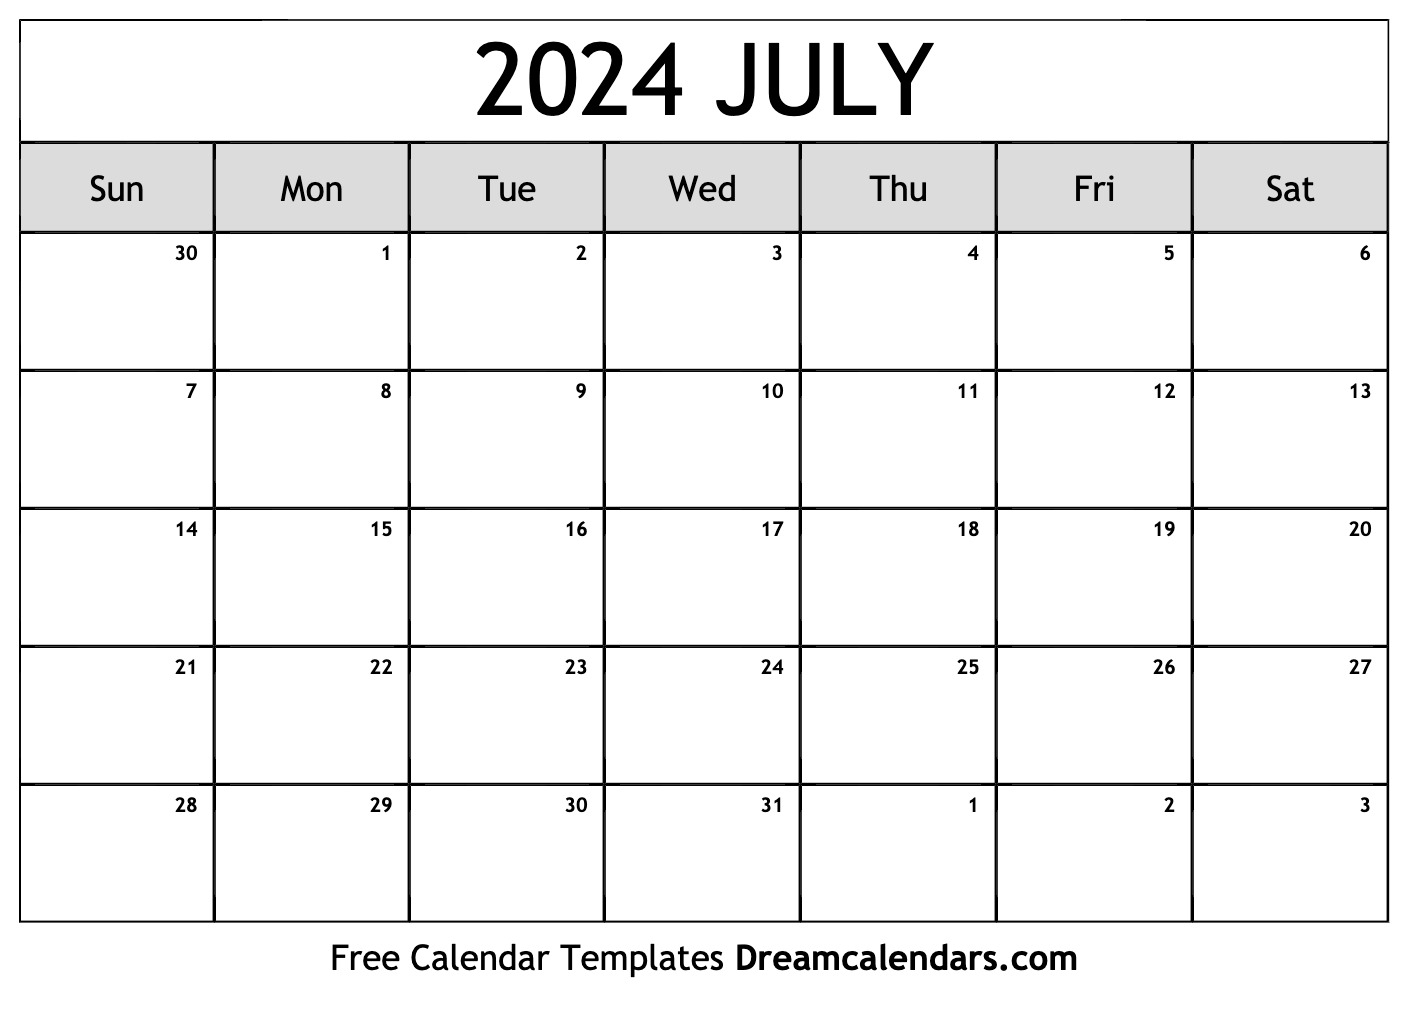 July 2024 Calendar | Free Blank Printable With Holidays for July Calendar 2024 Printable Free